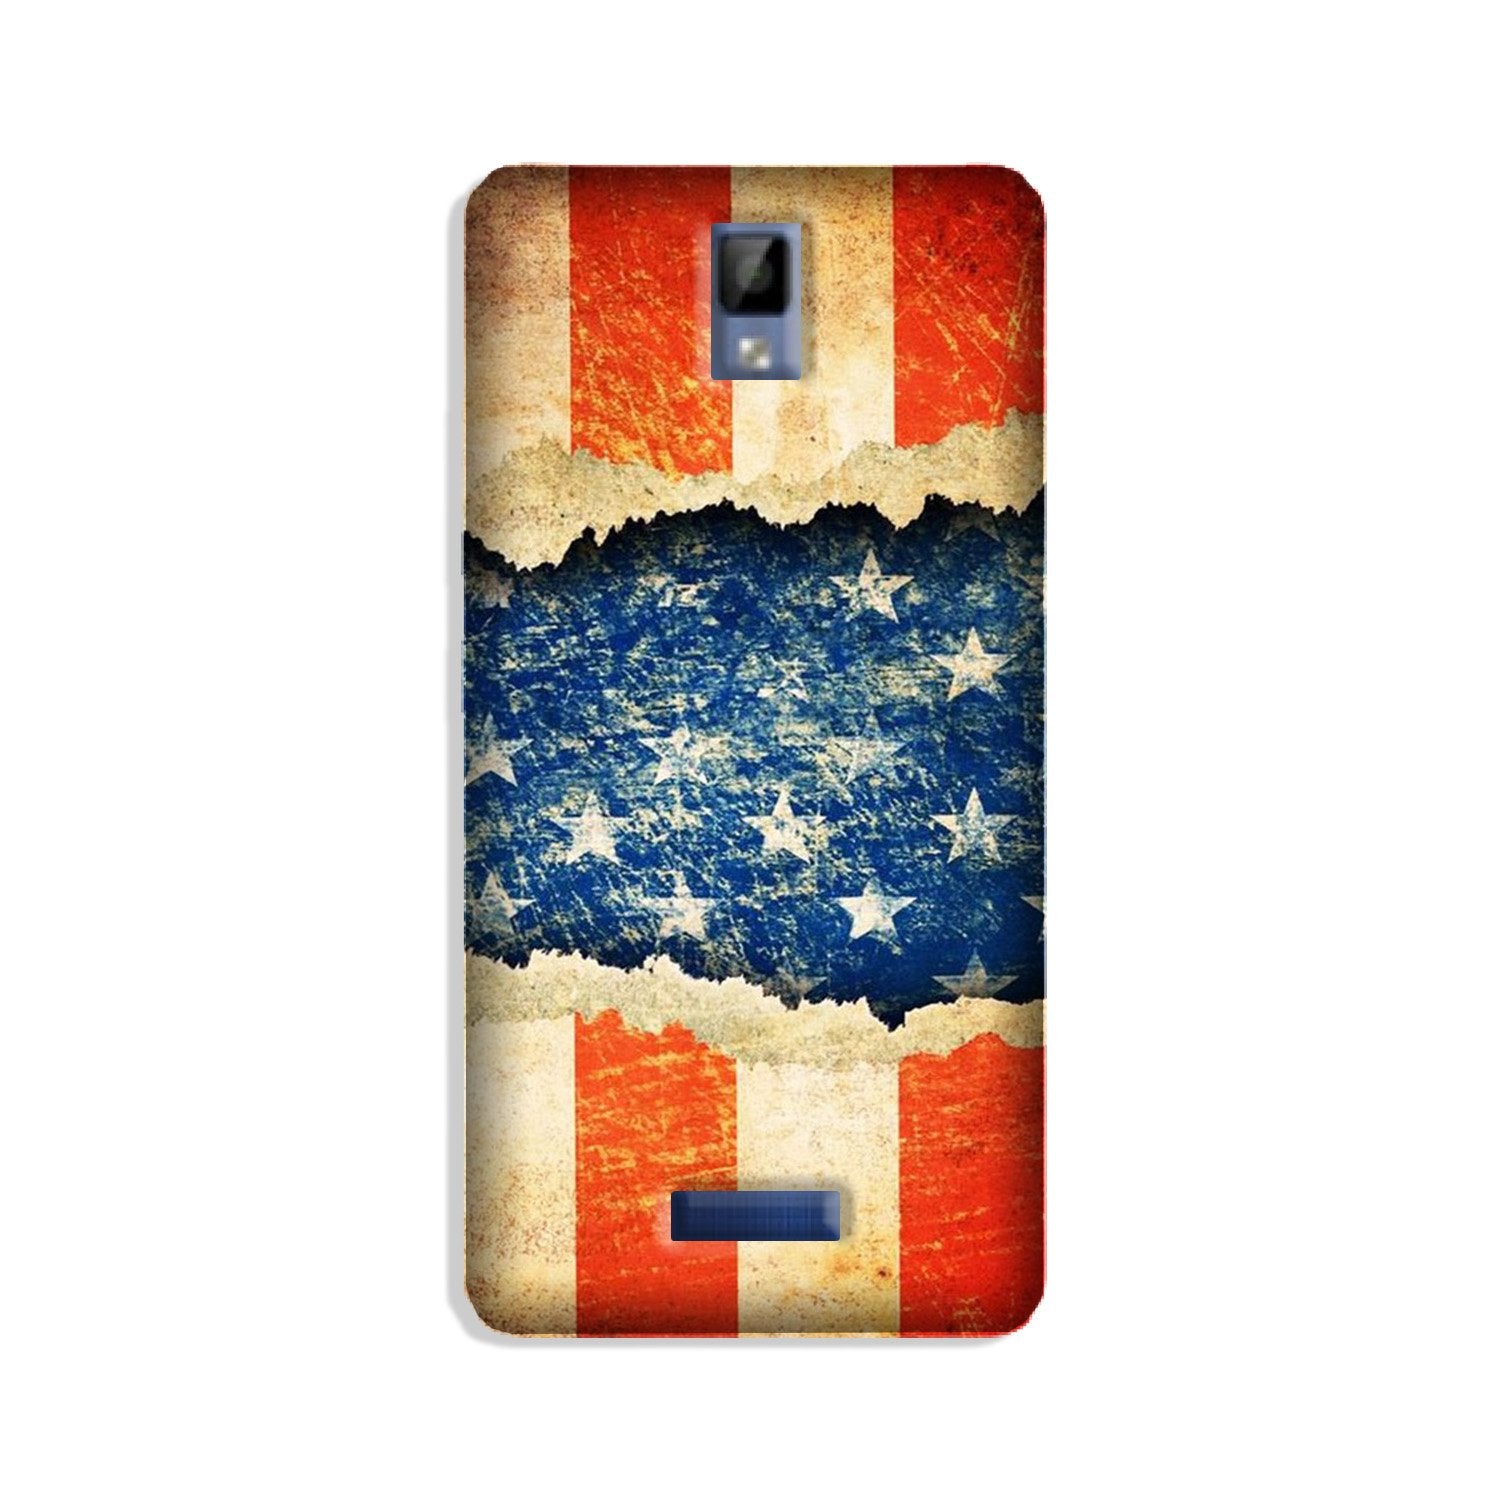 United Kingdom Case for Gionee P7